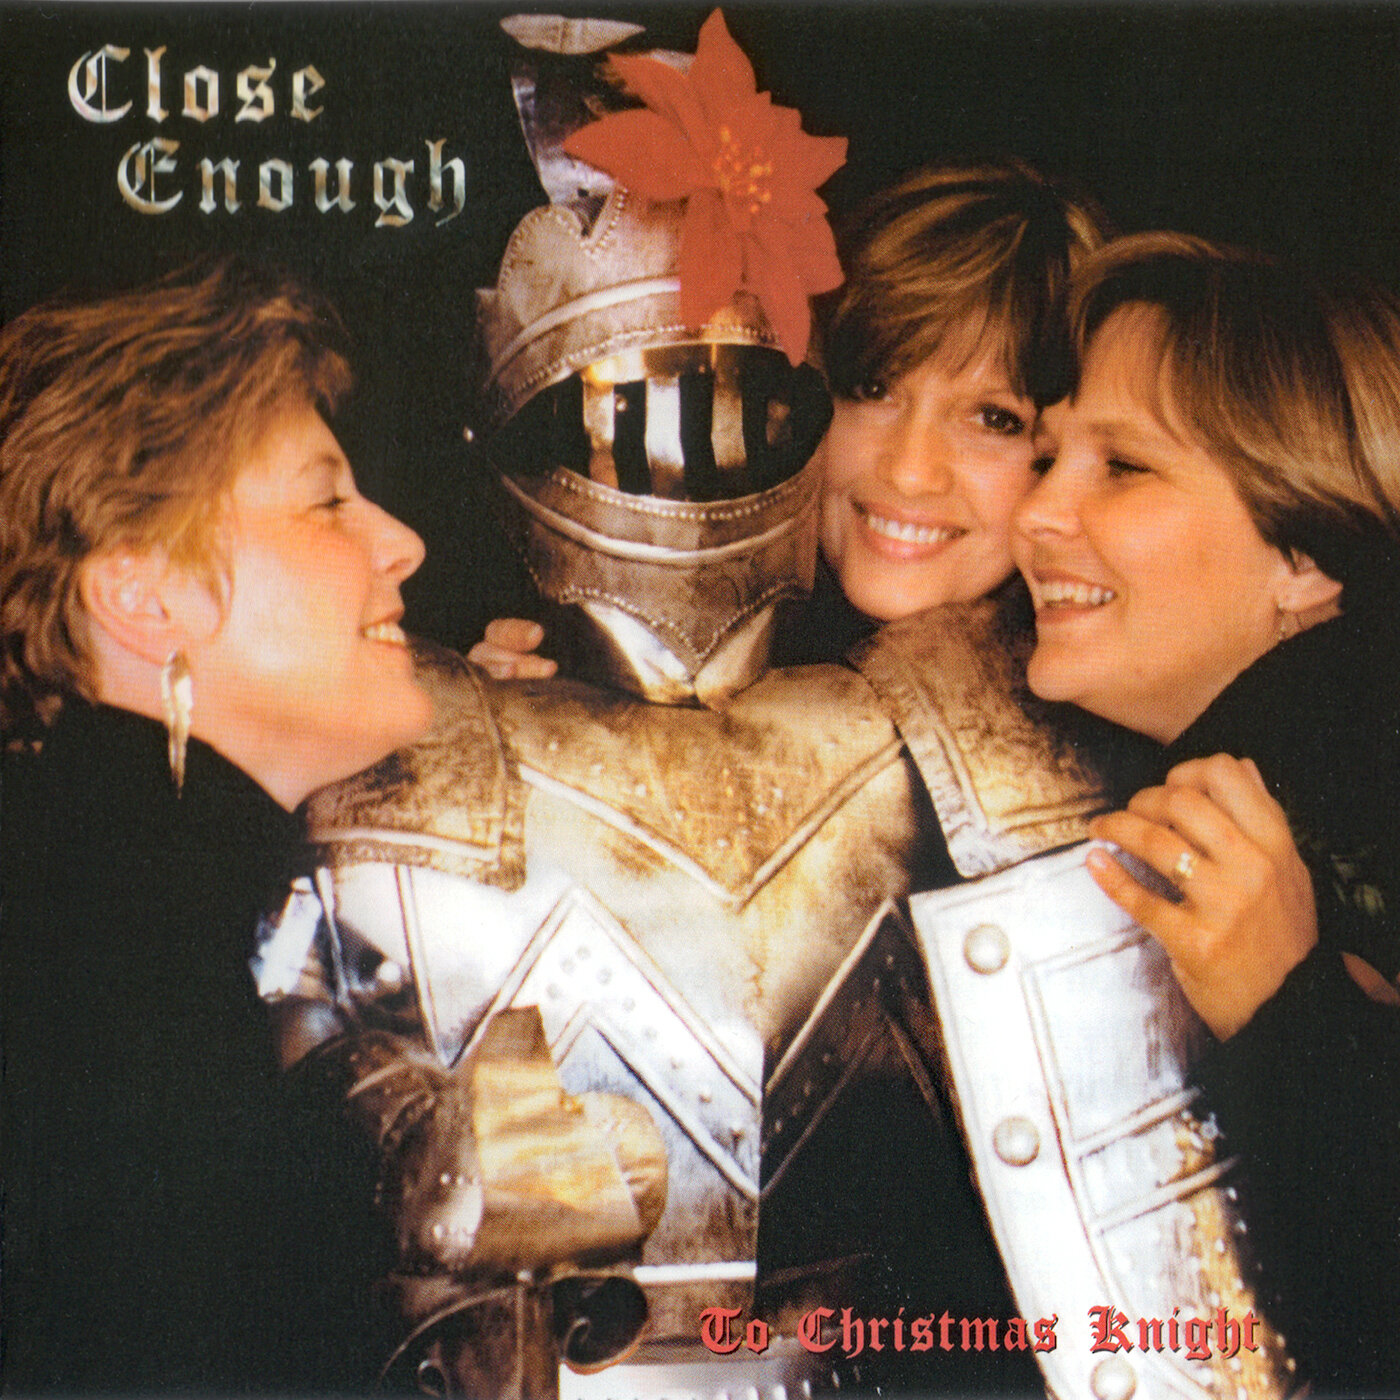 Close Enough to Christmas Knight